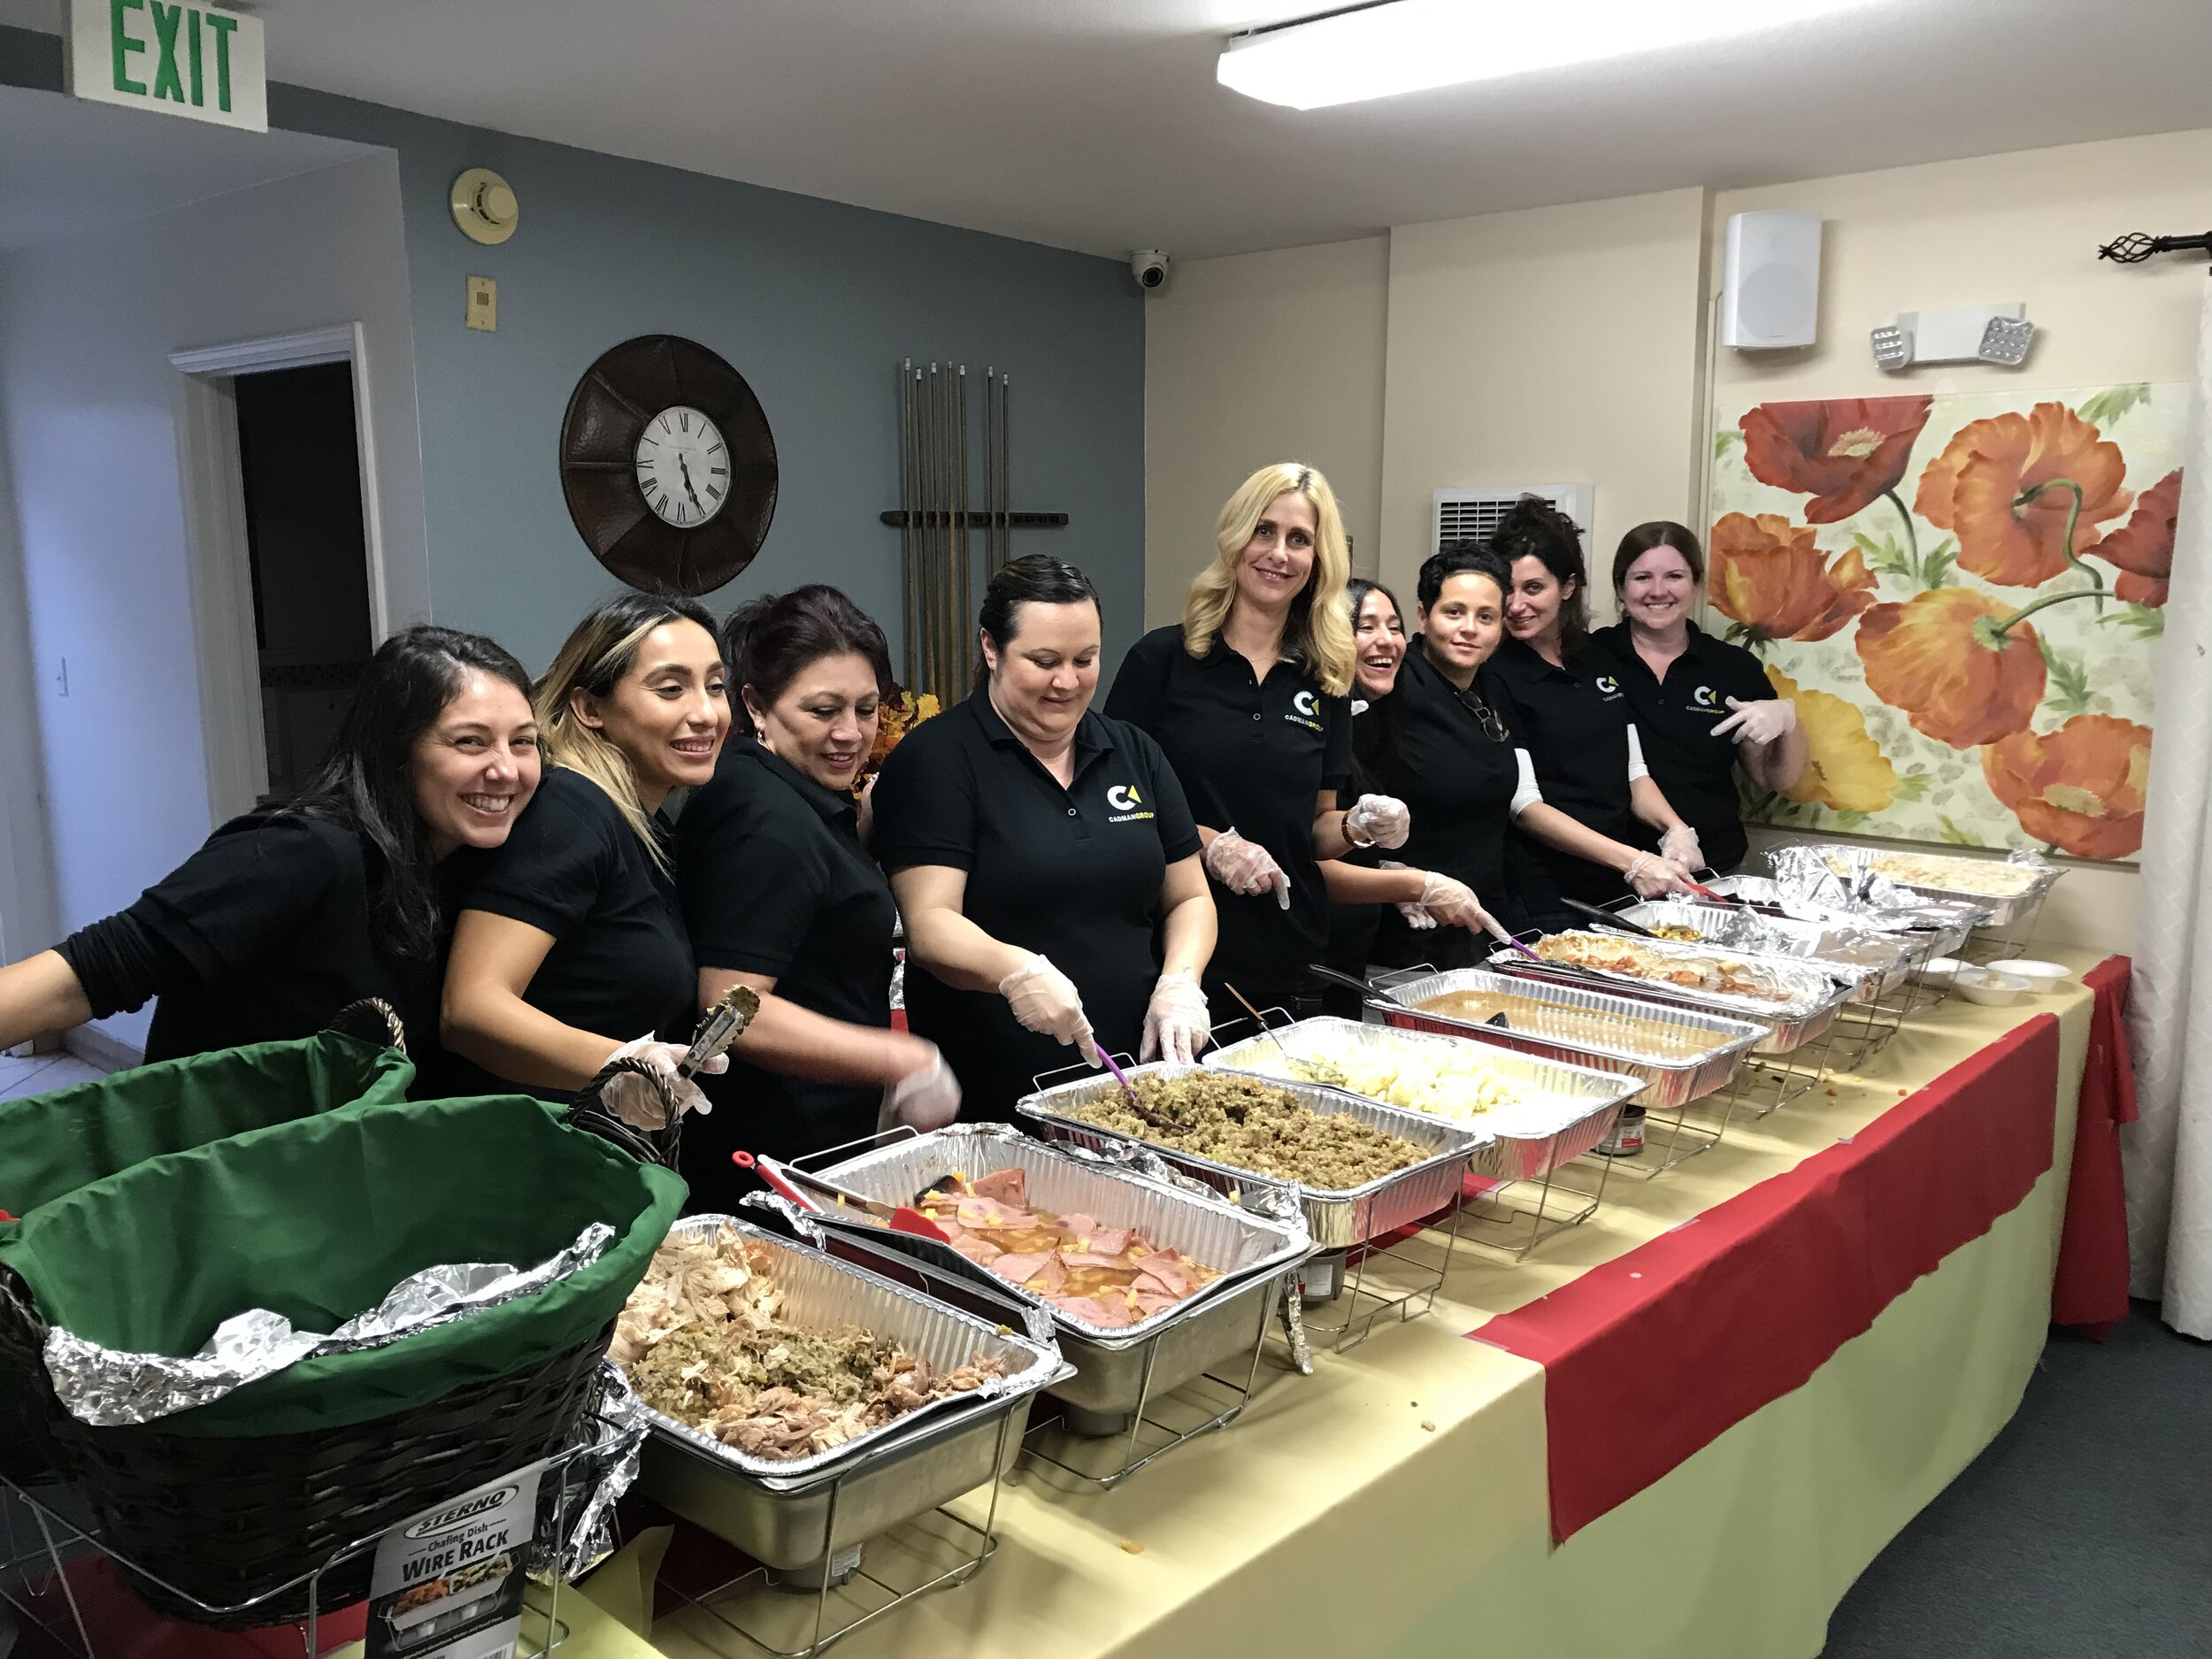 #cadmancares Cadman Group serves meals to the tenants each Thanksgiving for a special annual party